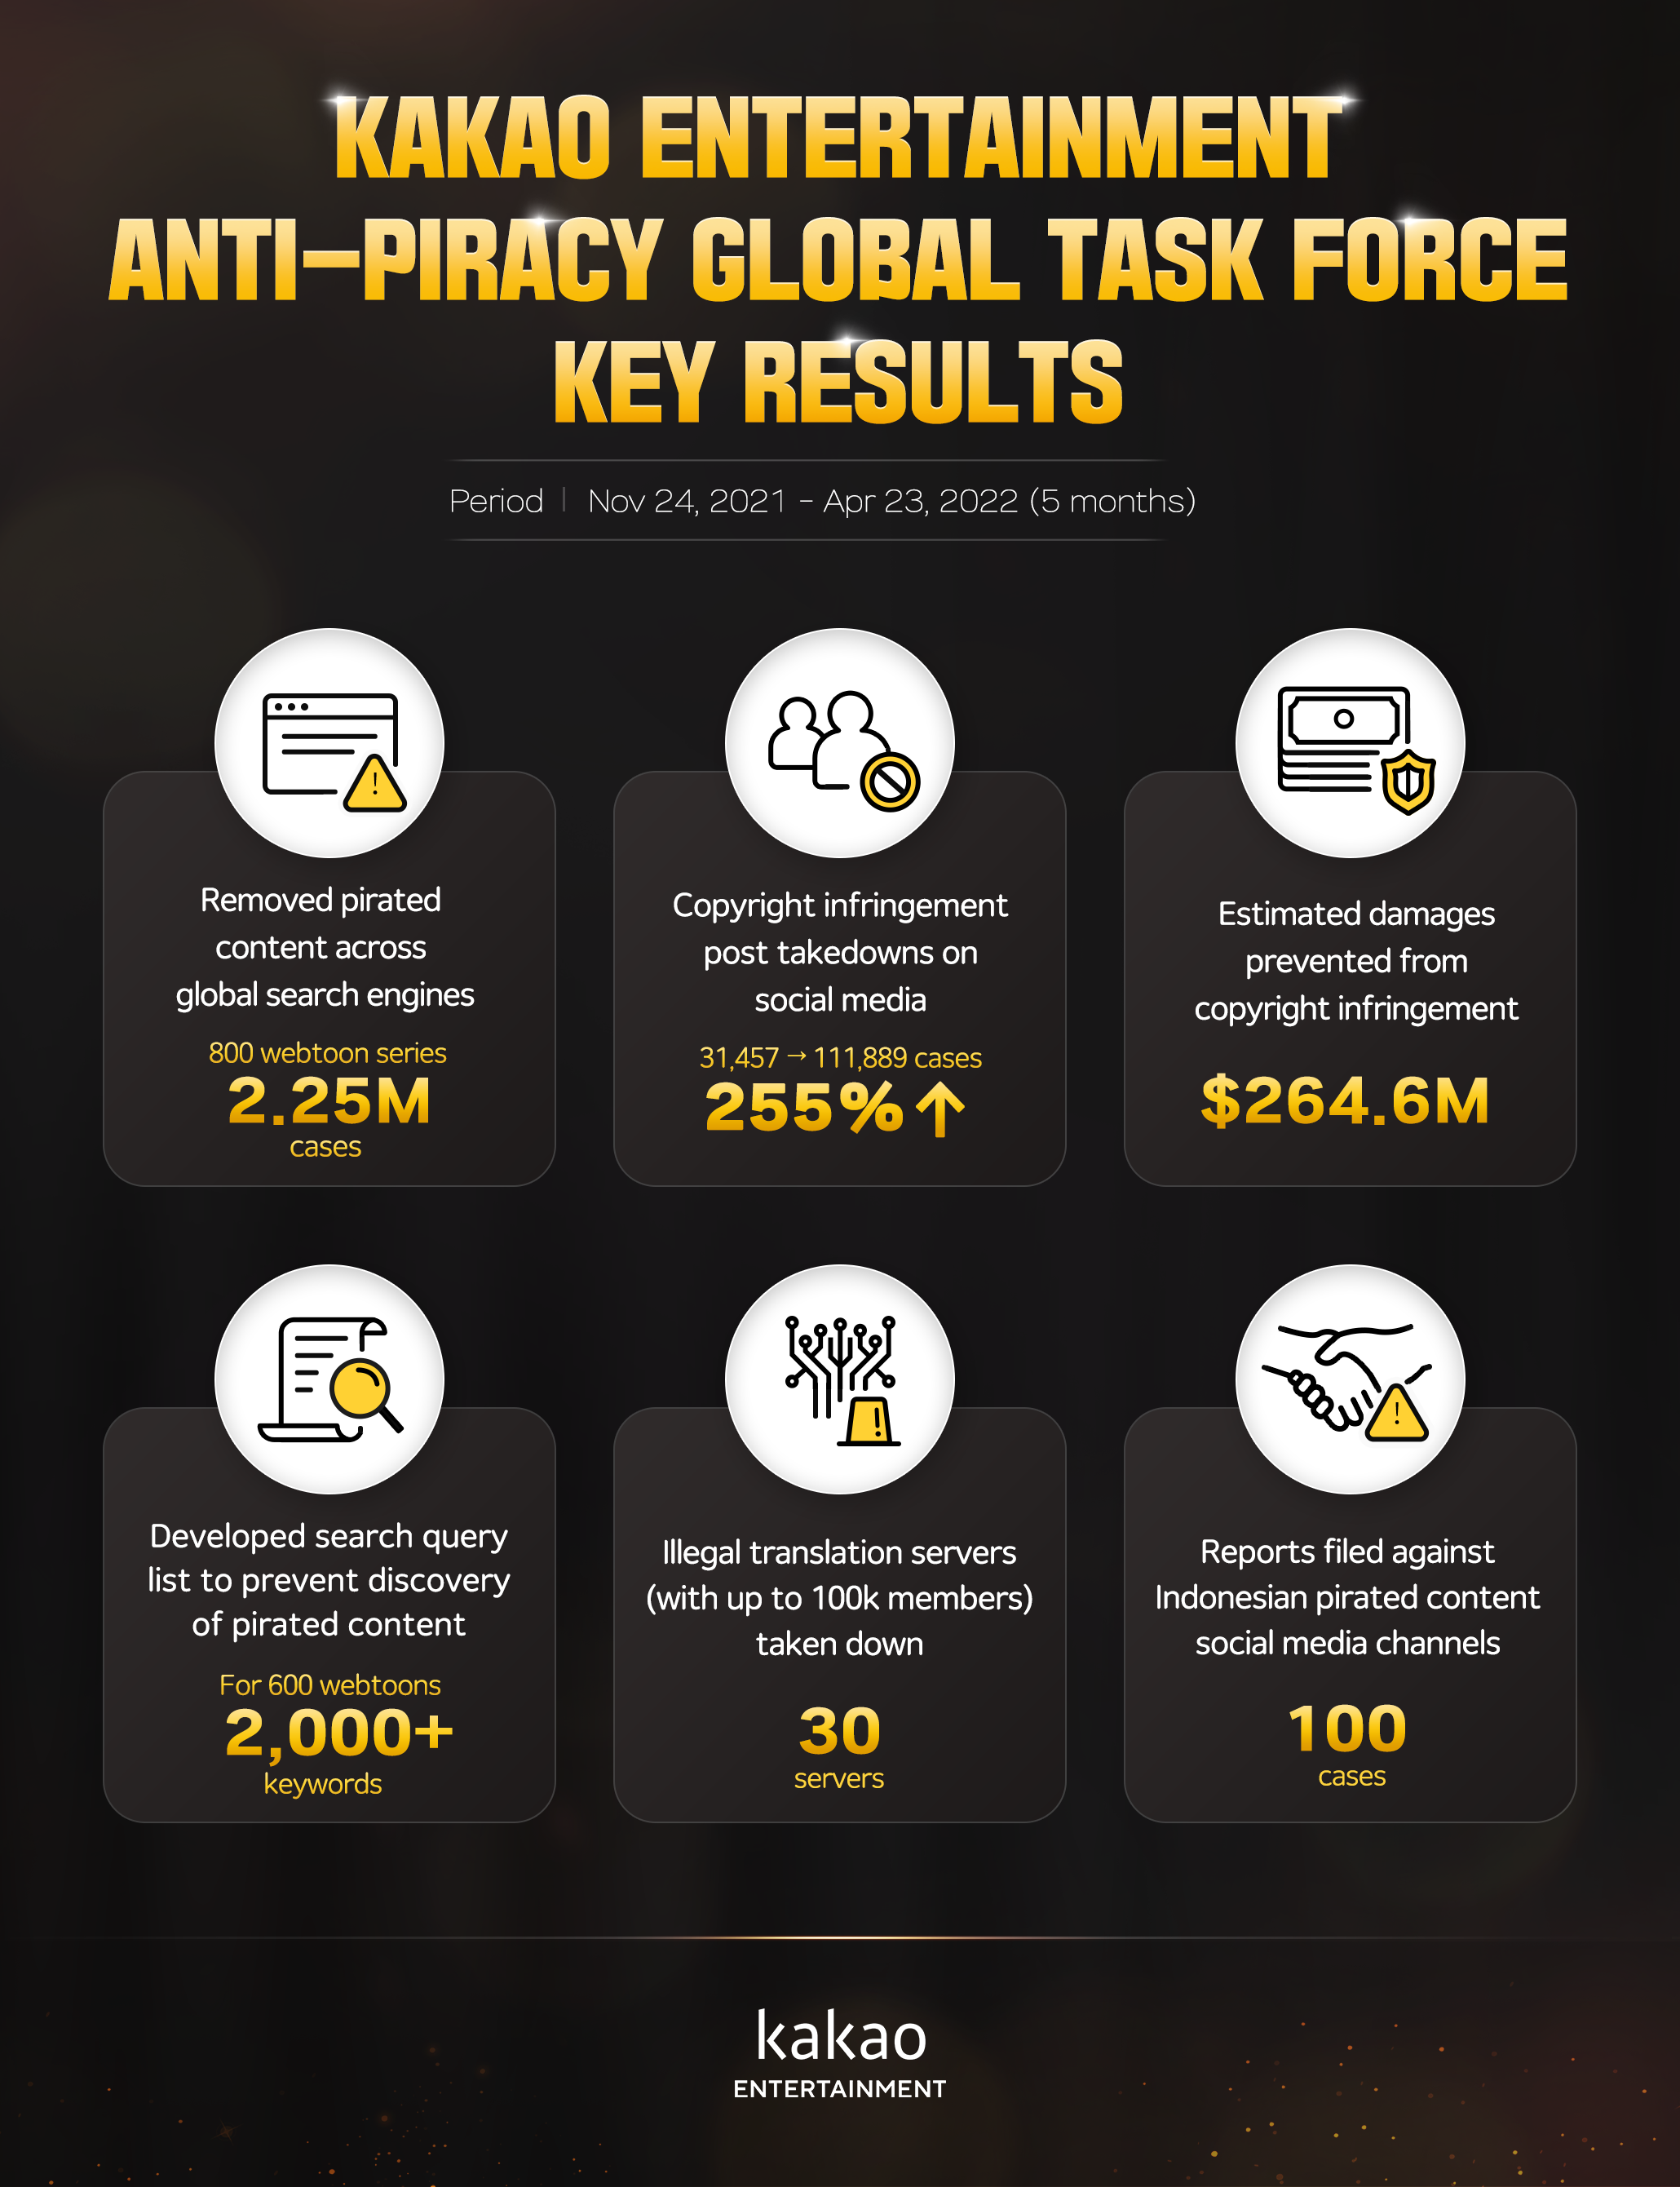 Infographic highlighting key results of Kakao Entertainment's Anti-piracy Global Task Force.